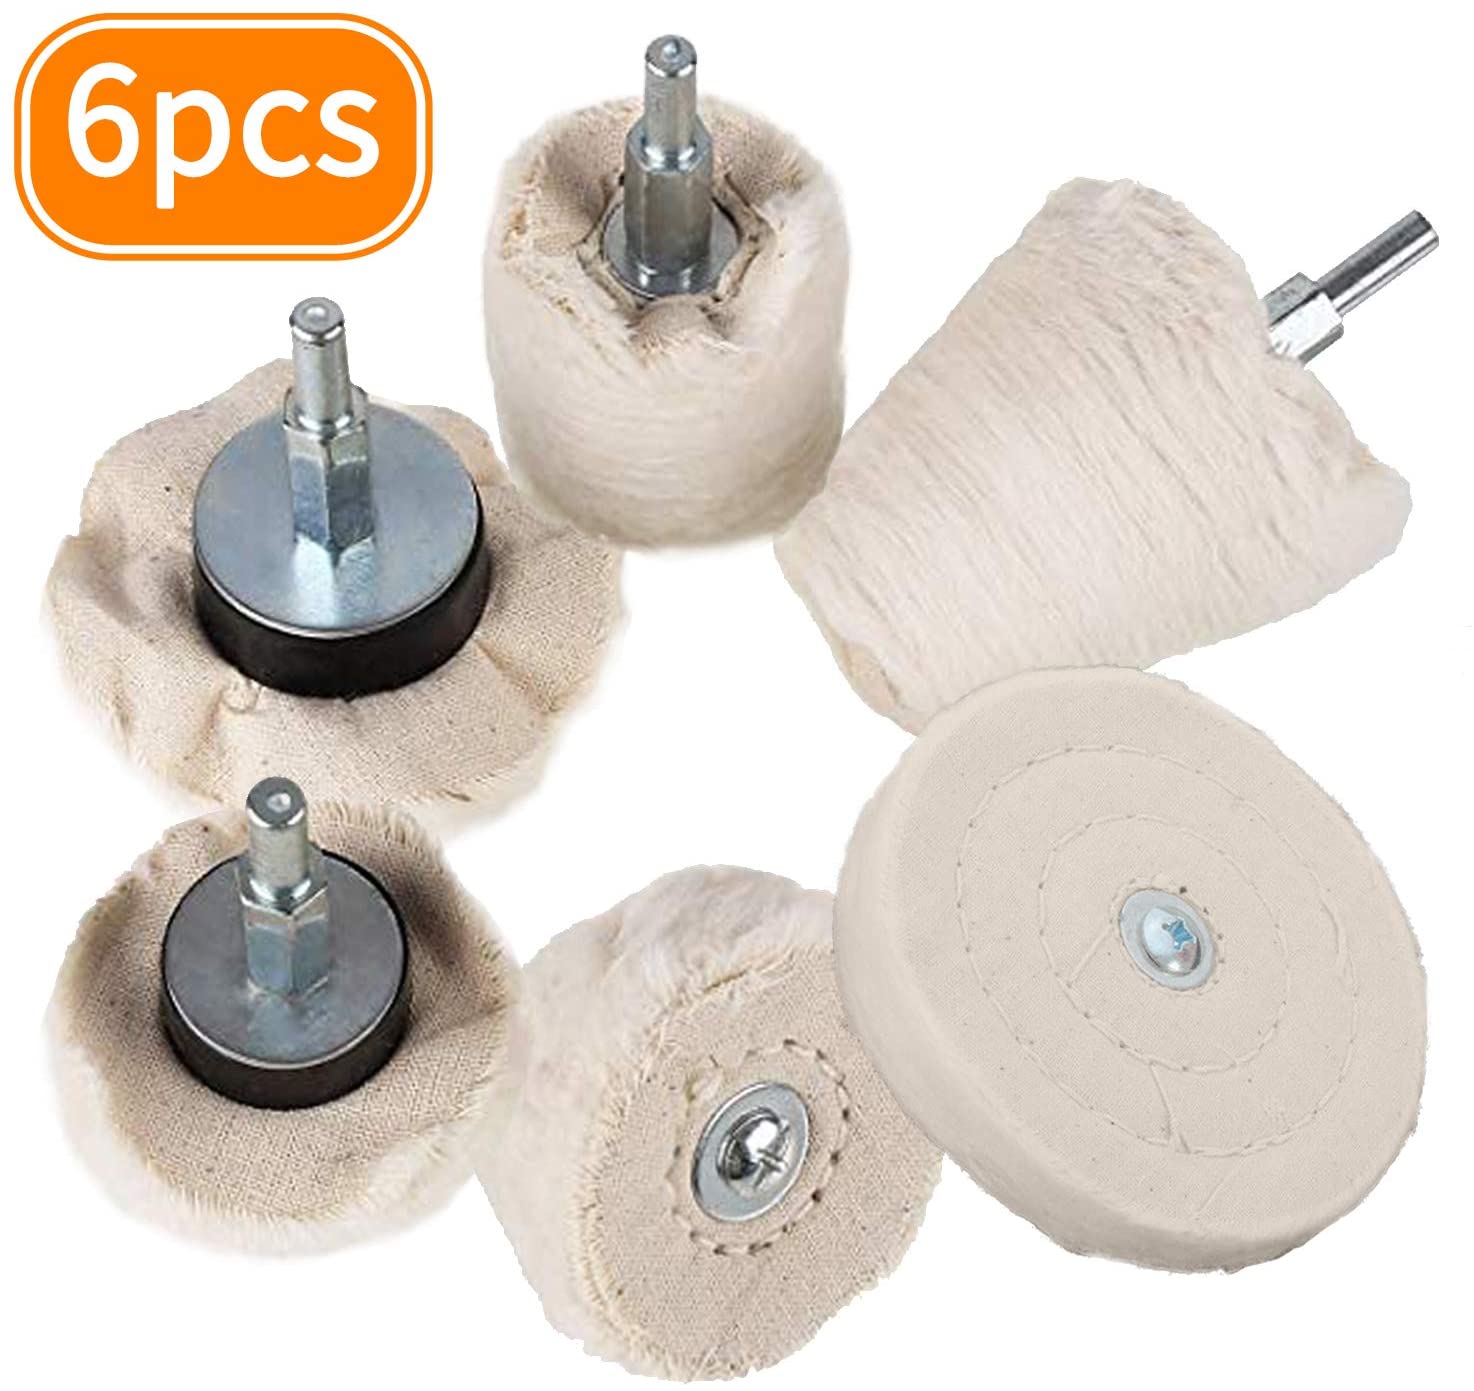 Buffing Wheel for Drill,AOBETAK 6PCS Polishing Compound Pads with 1/4" Handle for Grinder Polisher Tool,Drill Buffer Pad Kit for Car,Metal,Stainless Steel,Machine,Wood,Plastic etc